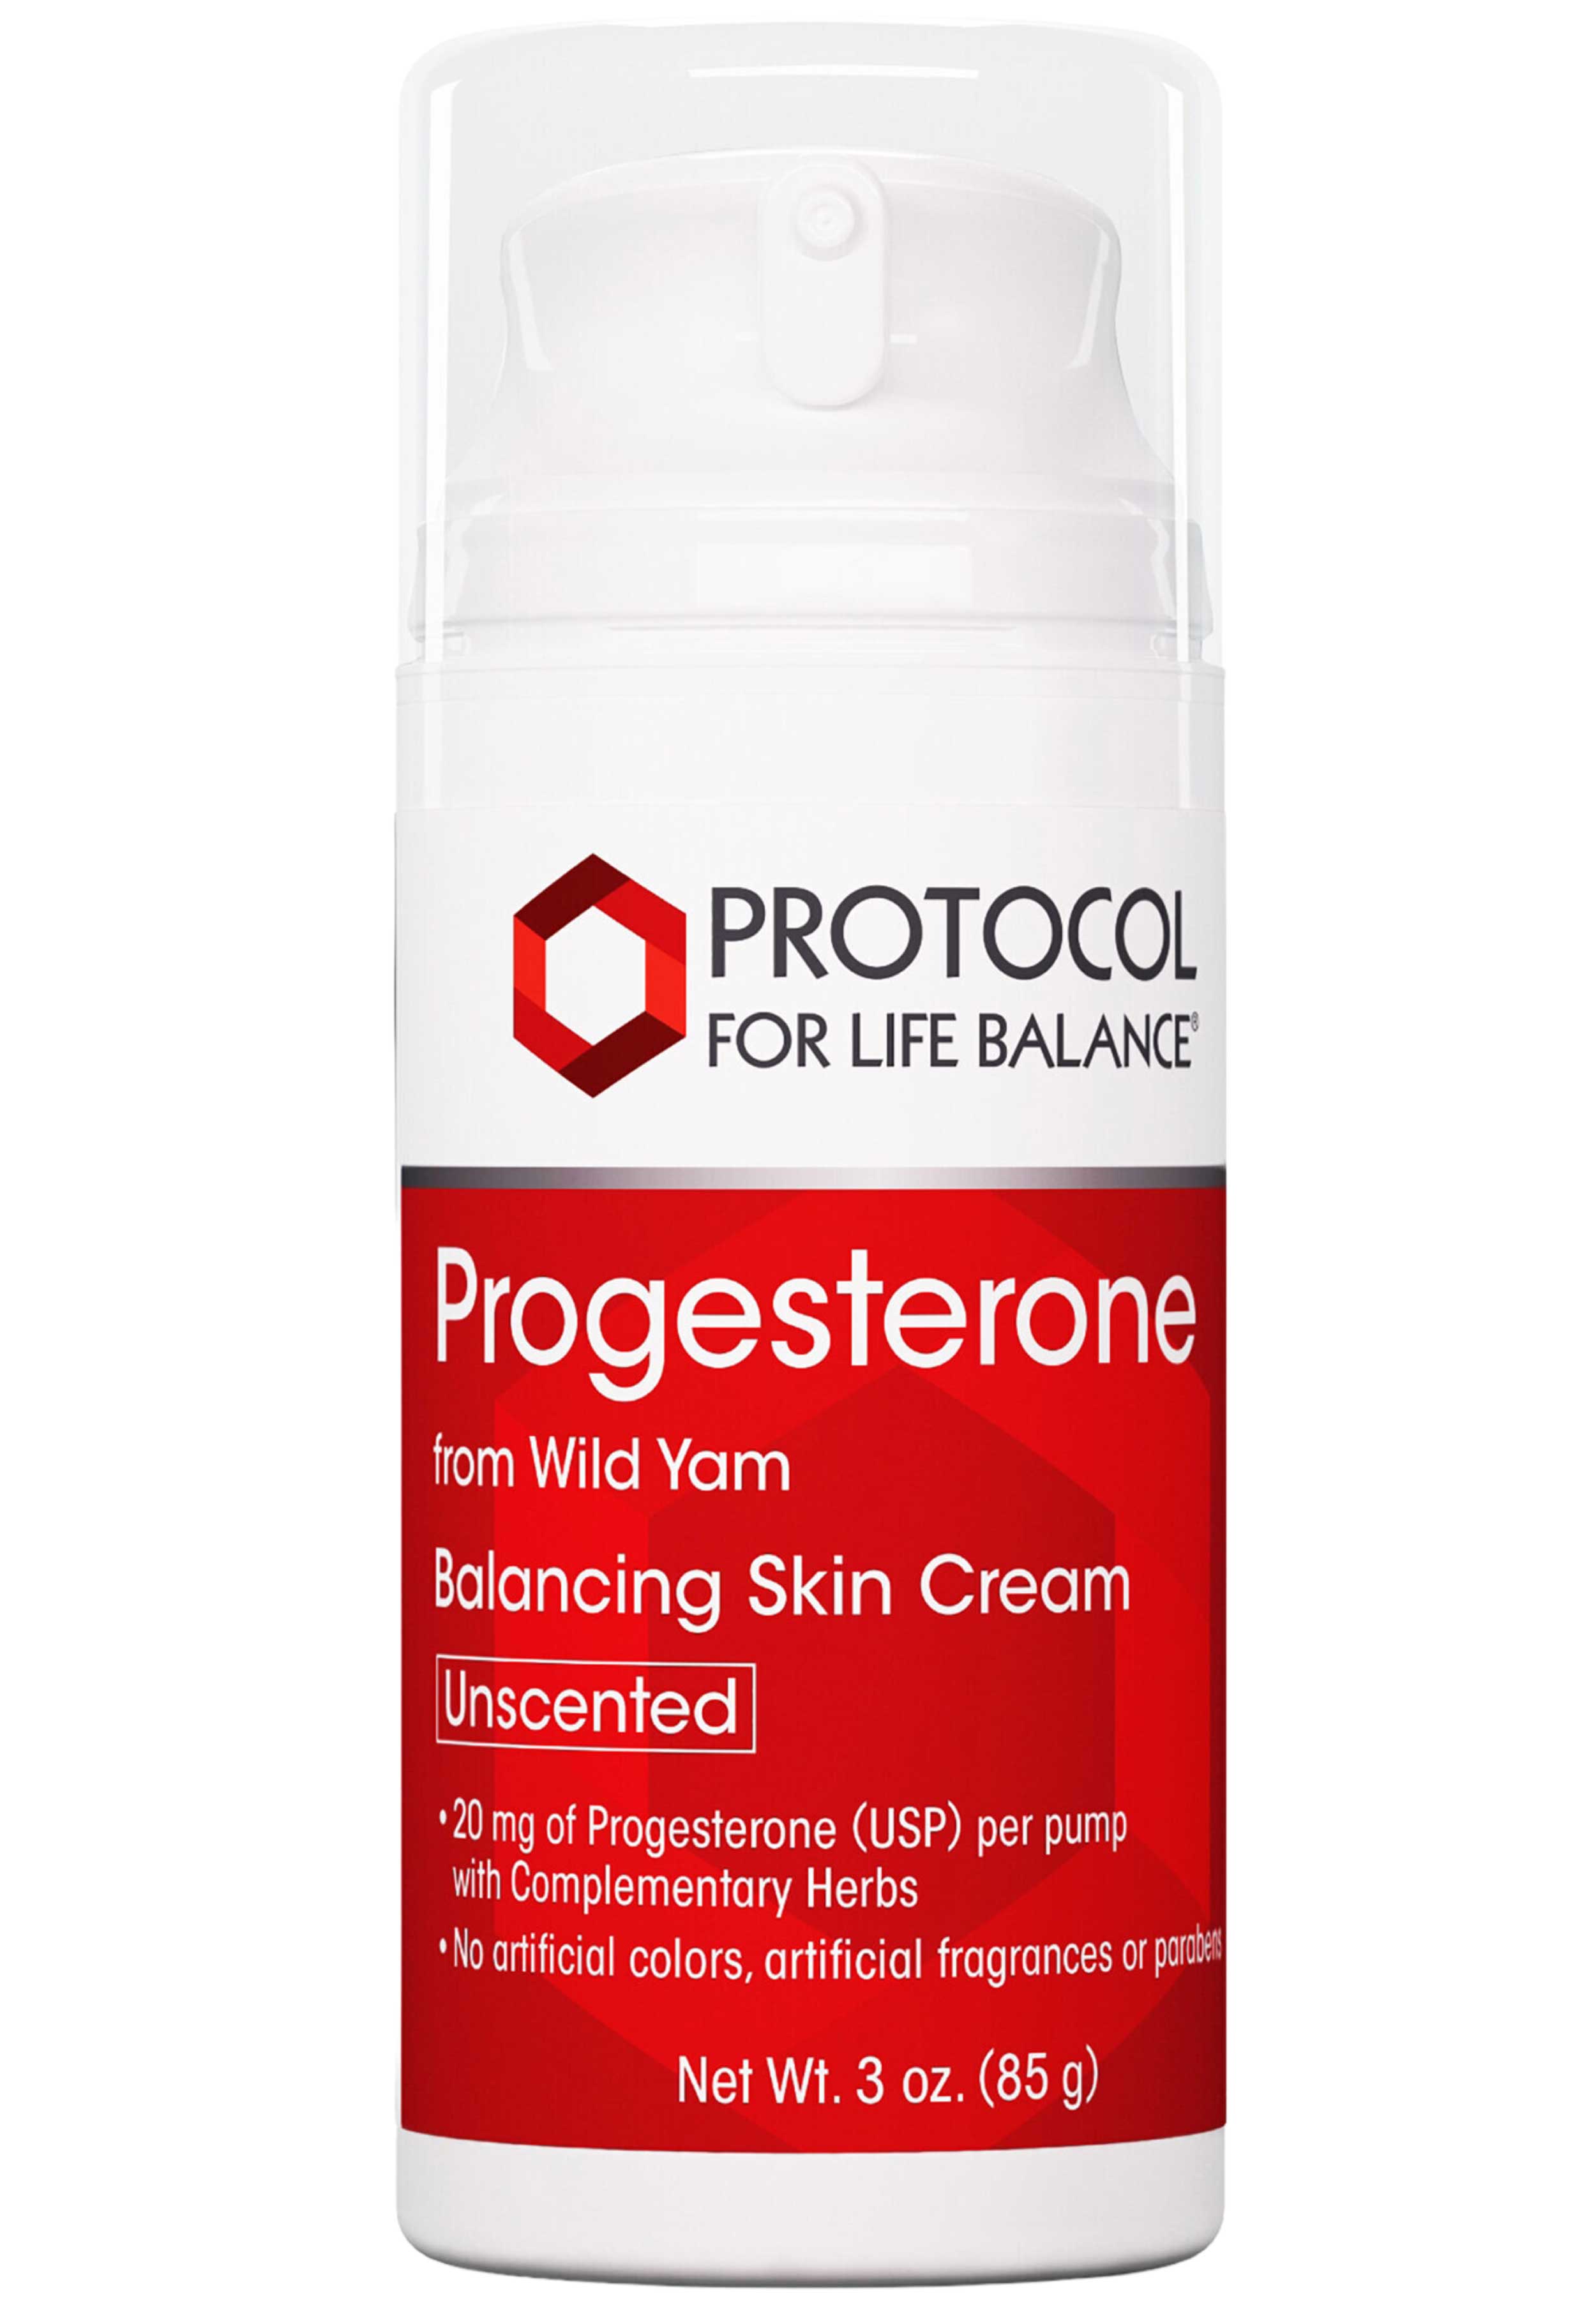 Protocol for Life Balance Progesterone from Wild Yam Unscented